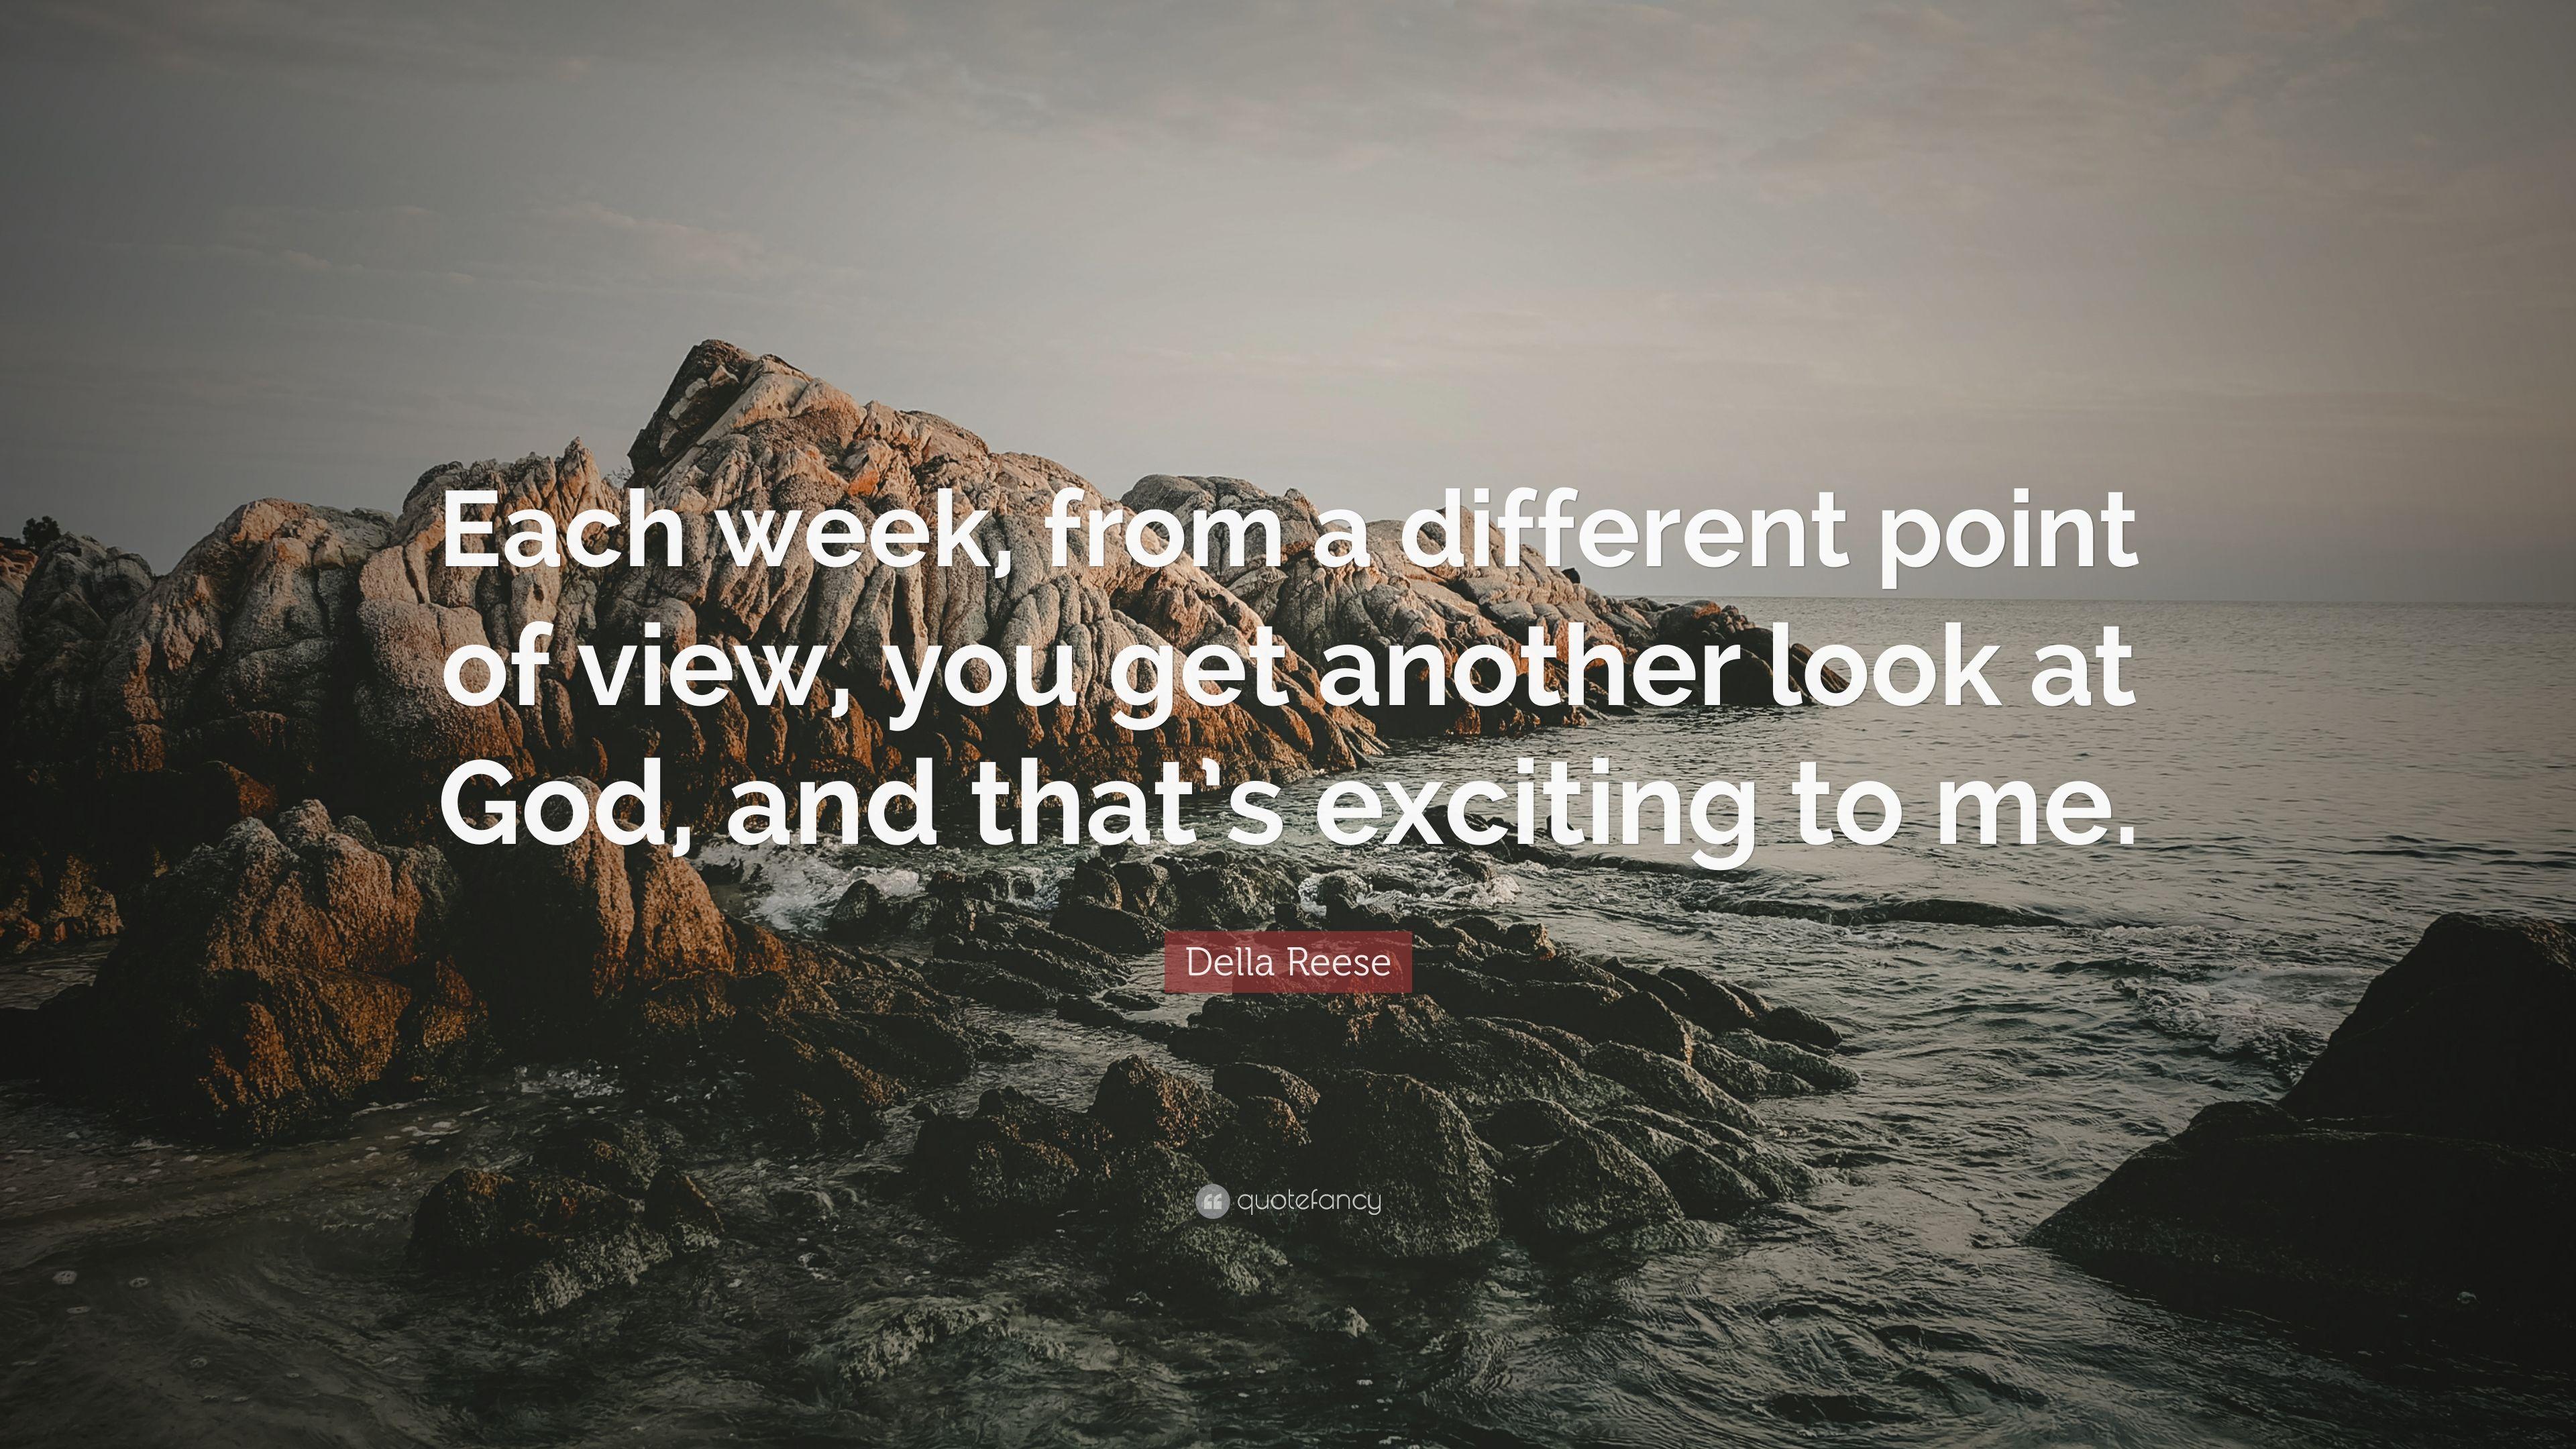 Della Reese Quote: “Each week, from a different point of view, you